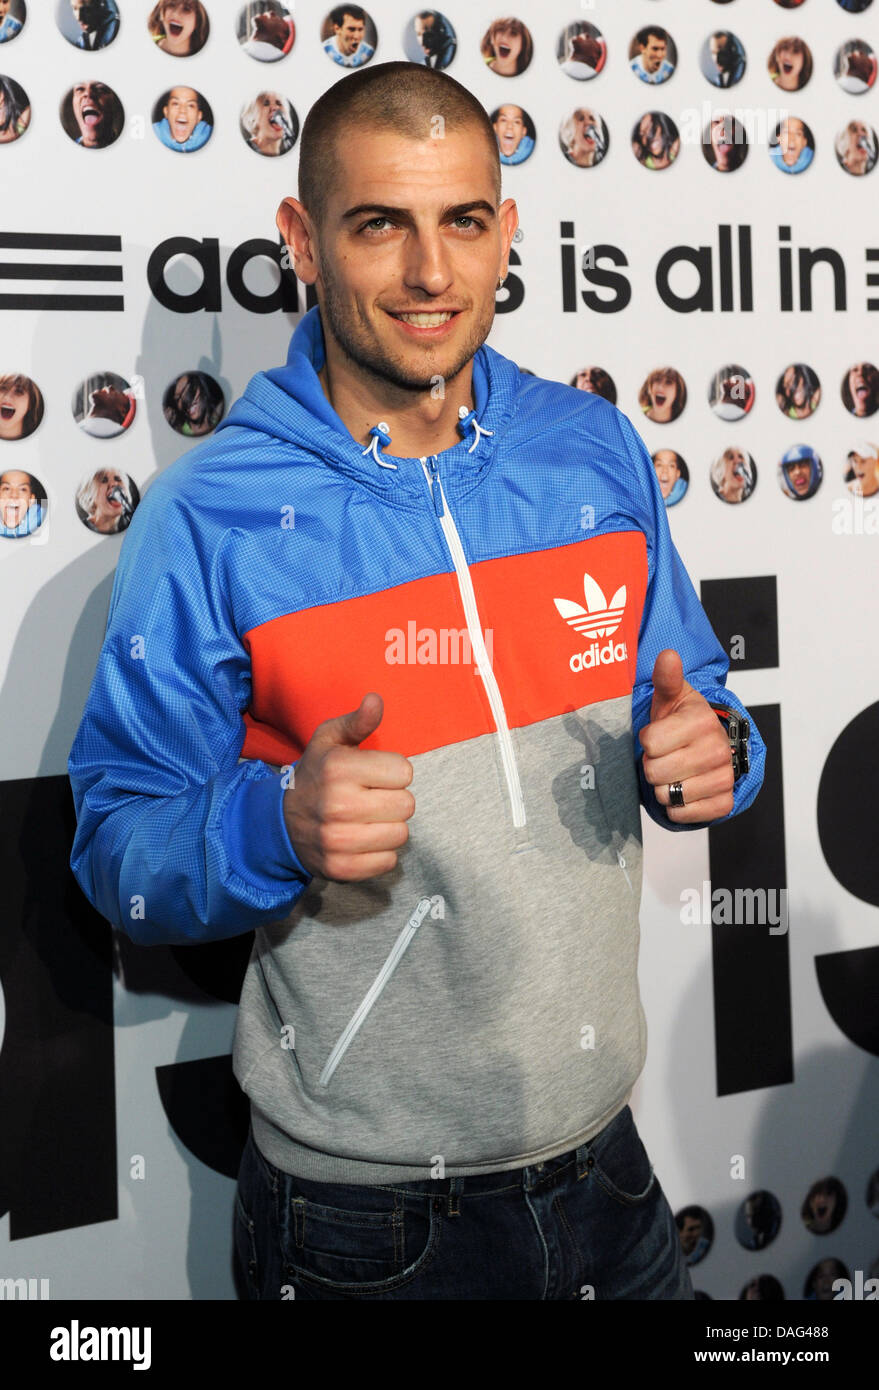 Croatian soccer player Mladen Petric of Hamburg SV arrives at a marketing  event of the sports apparel manufacturer Adidas in Munich, Germany, 16  March 2011. More than two dozen corporate figures are